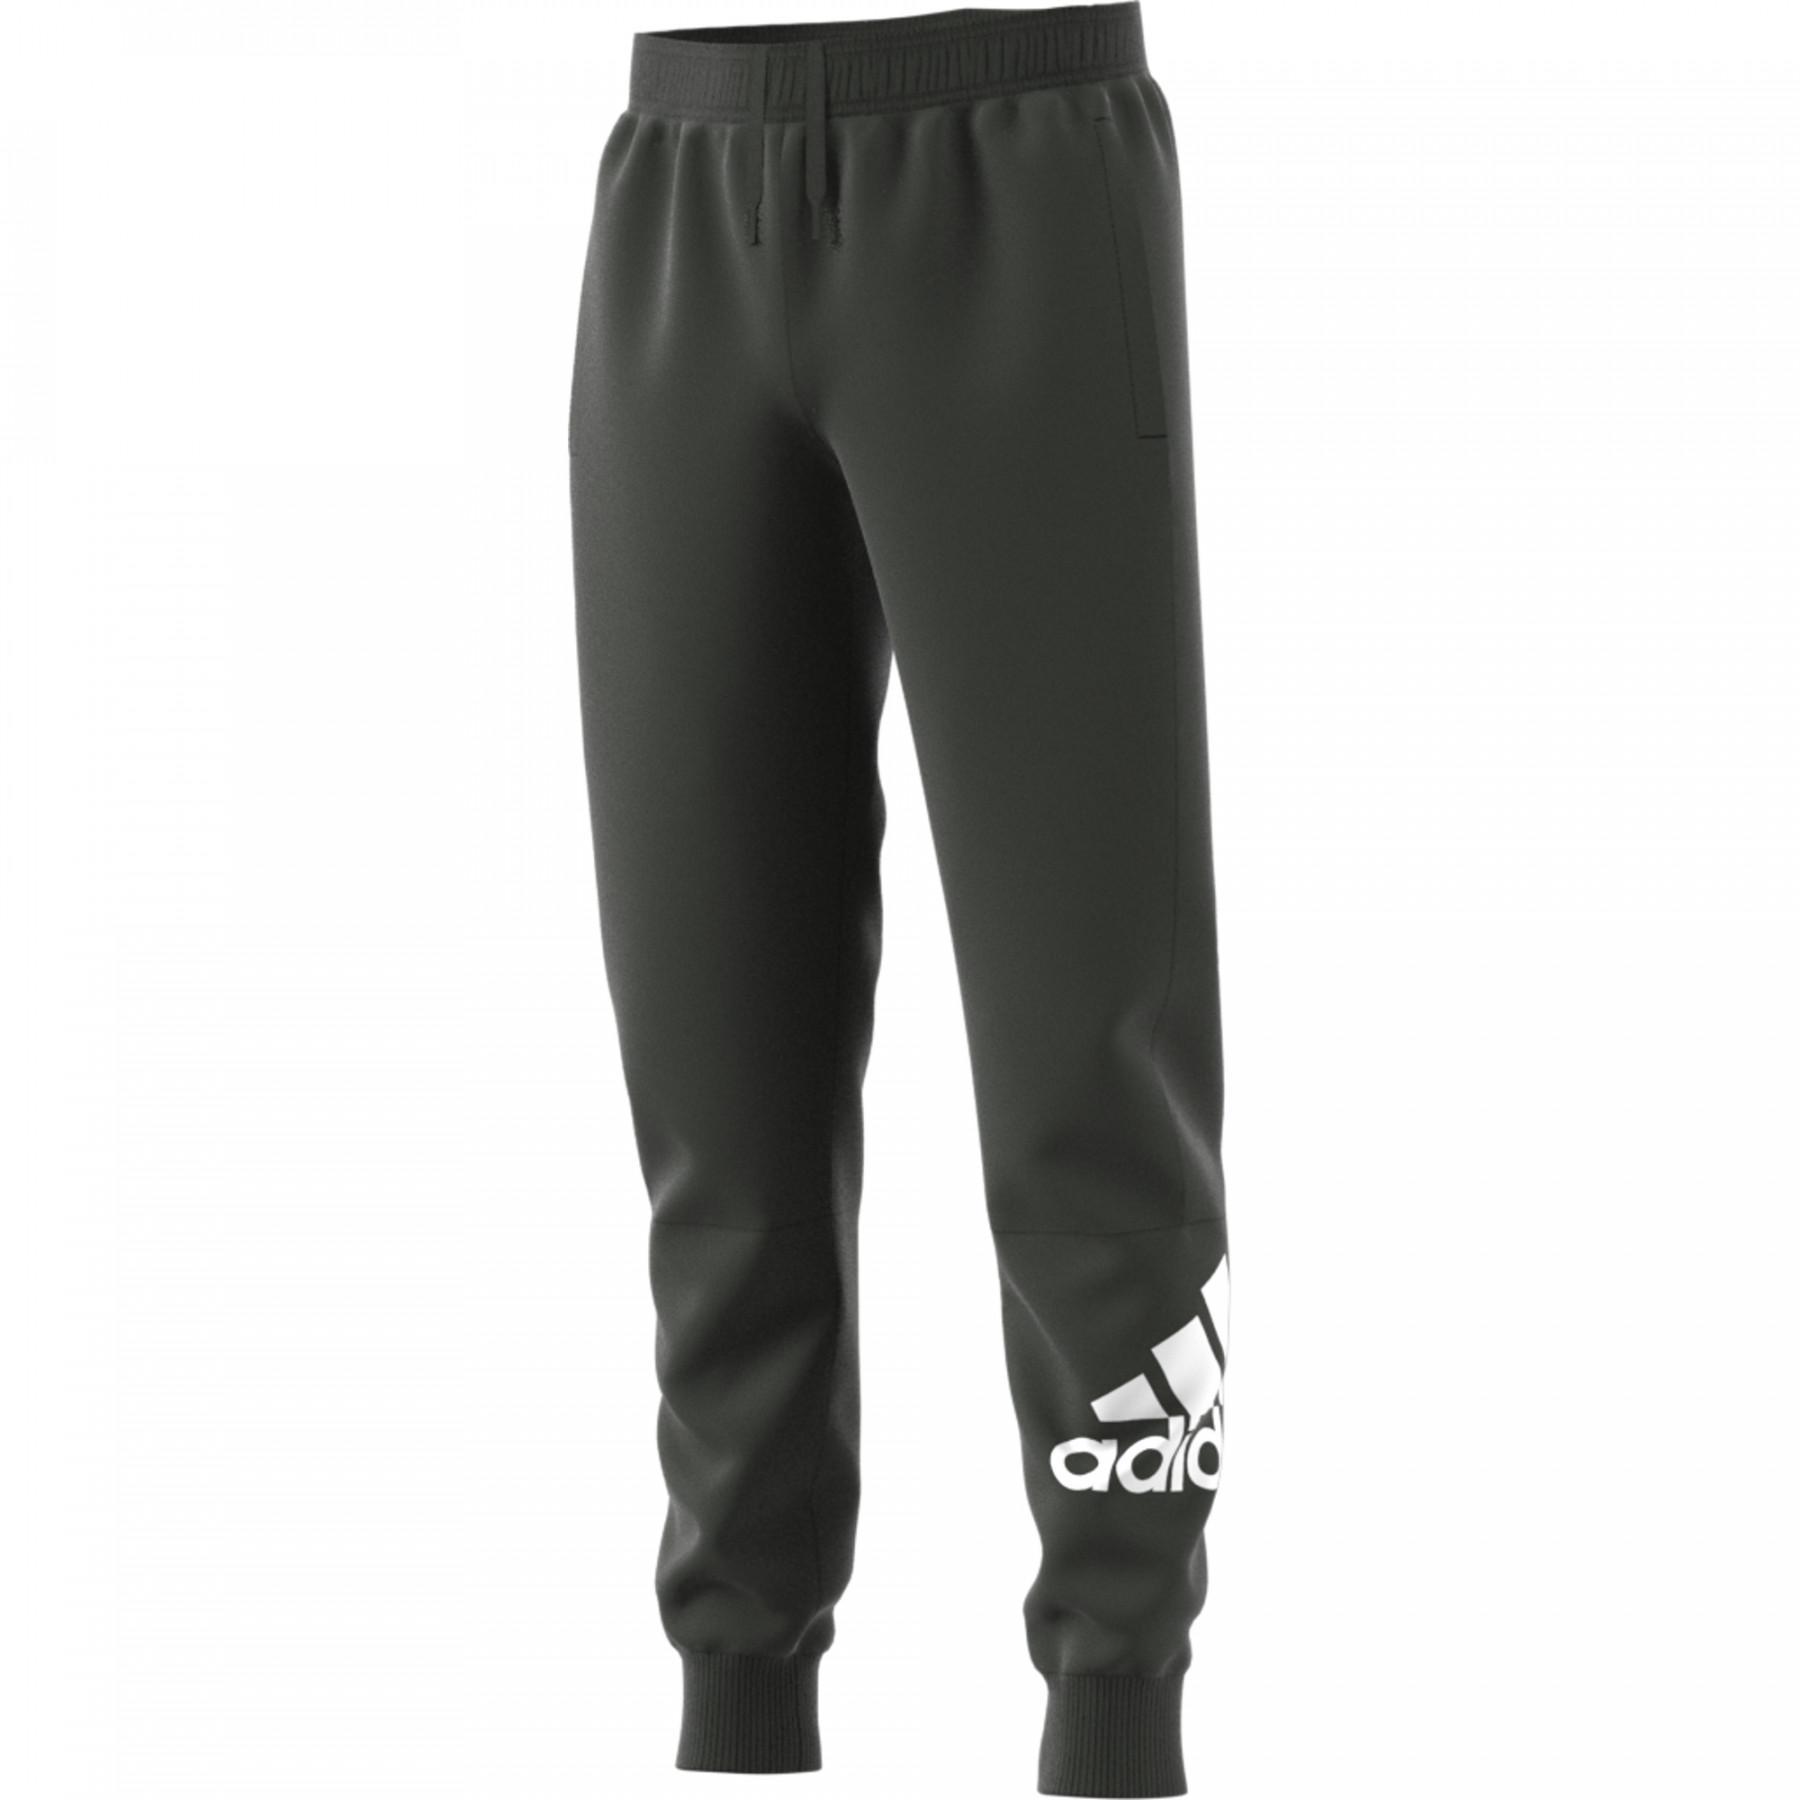 Children's trousers adidas Must Haves